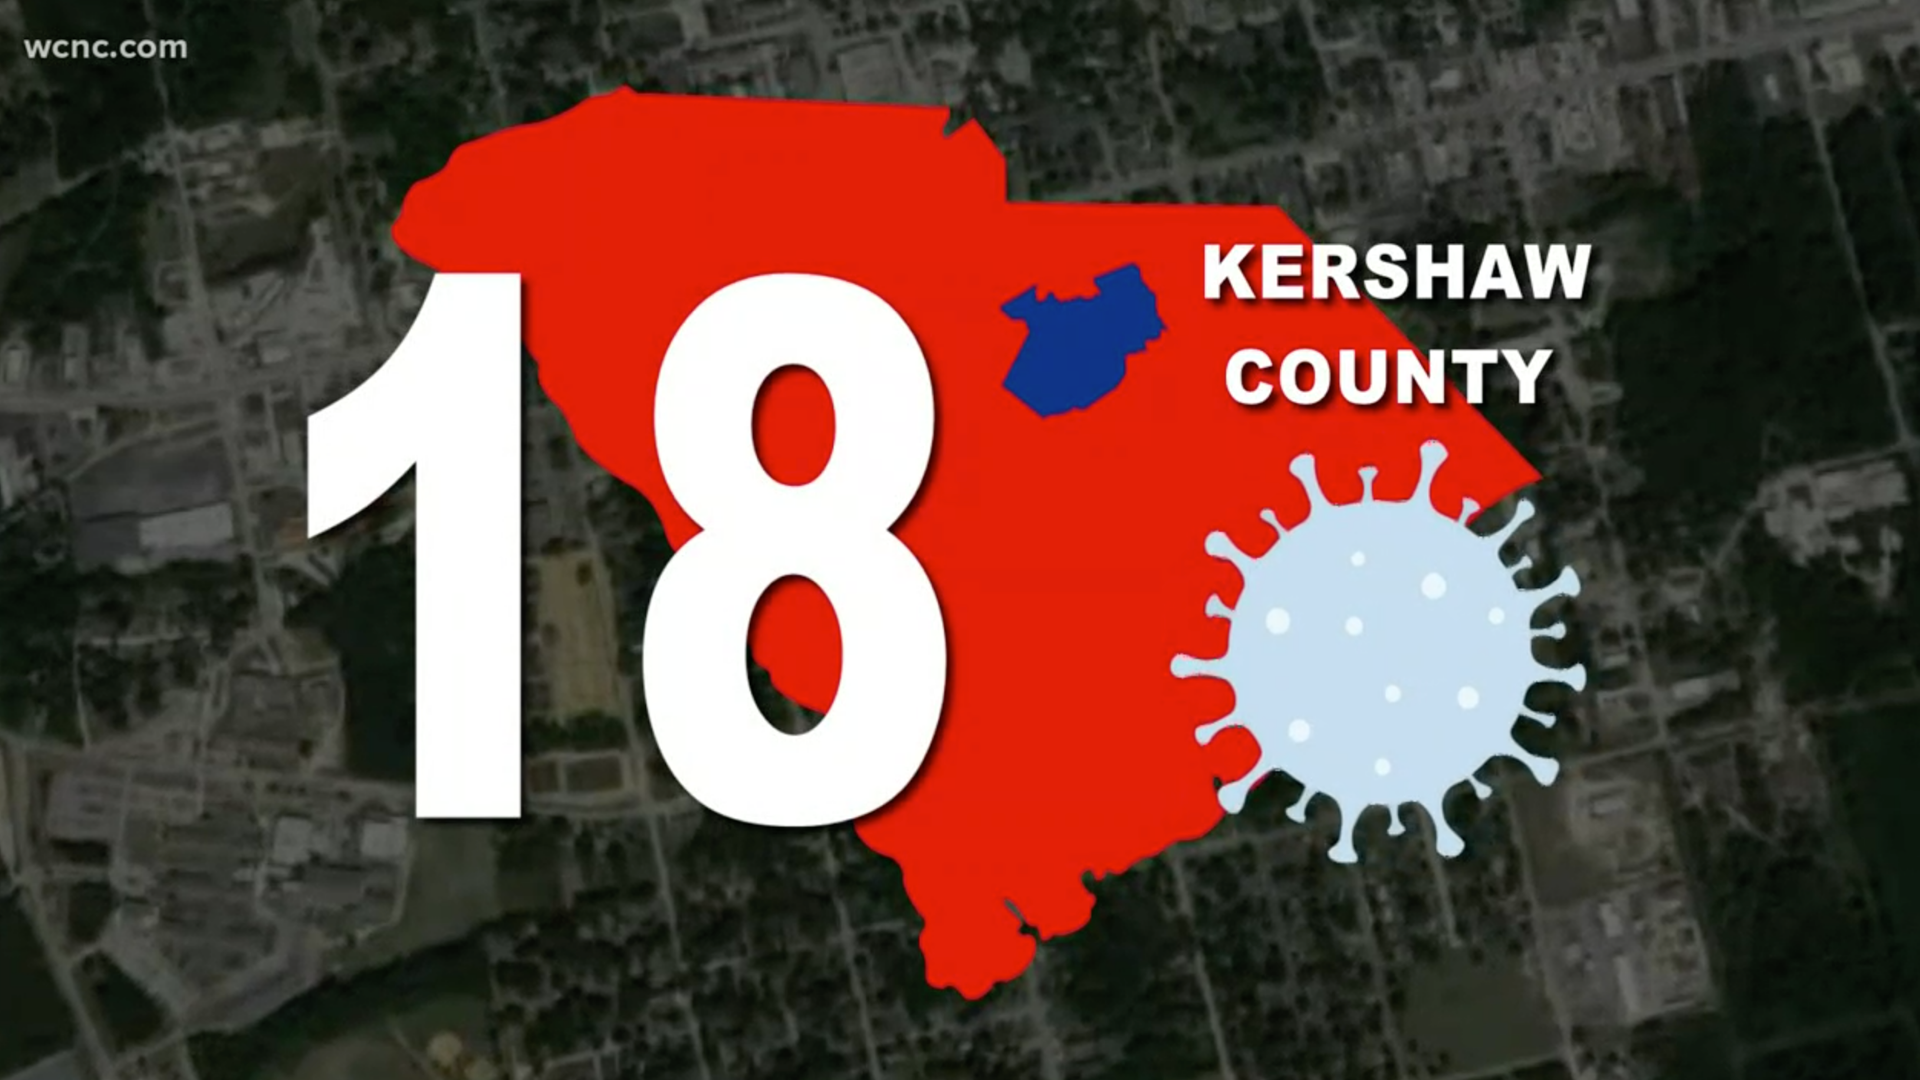 The state has now documented 33 cases statewide. Of those 33, state records show 18 are in and around Camden in Kershaw County.